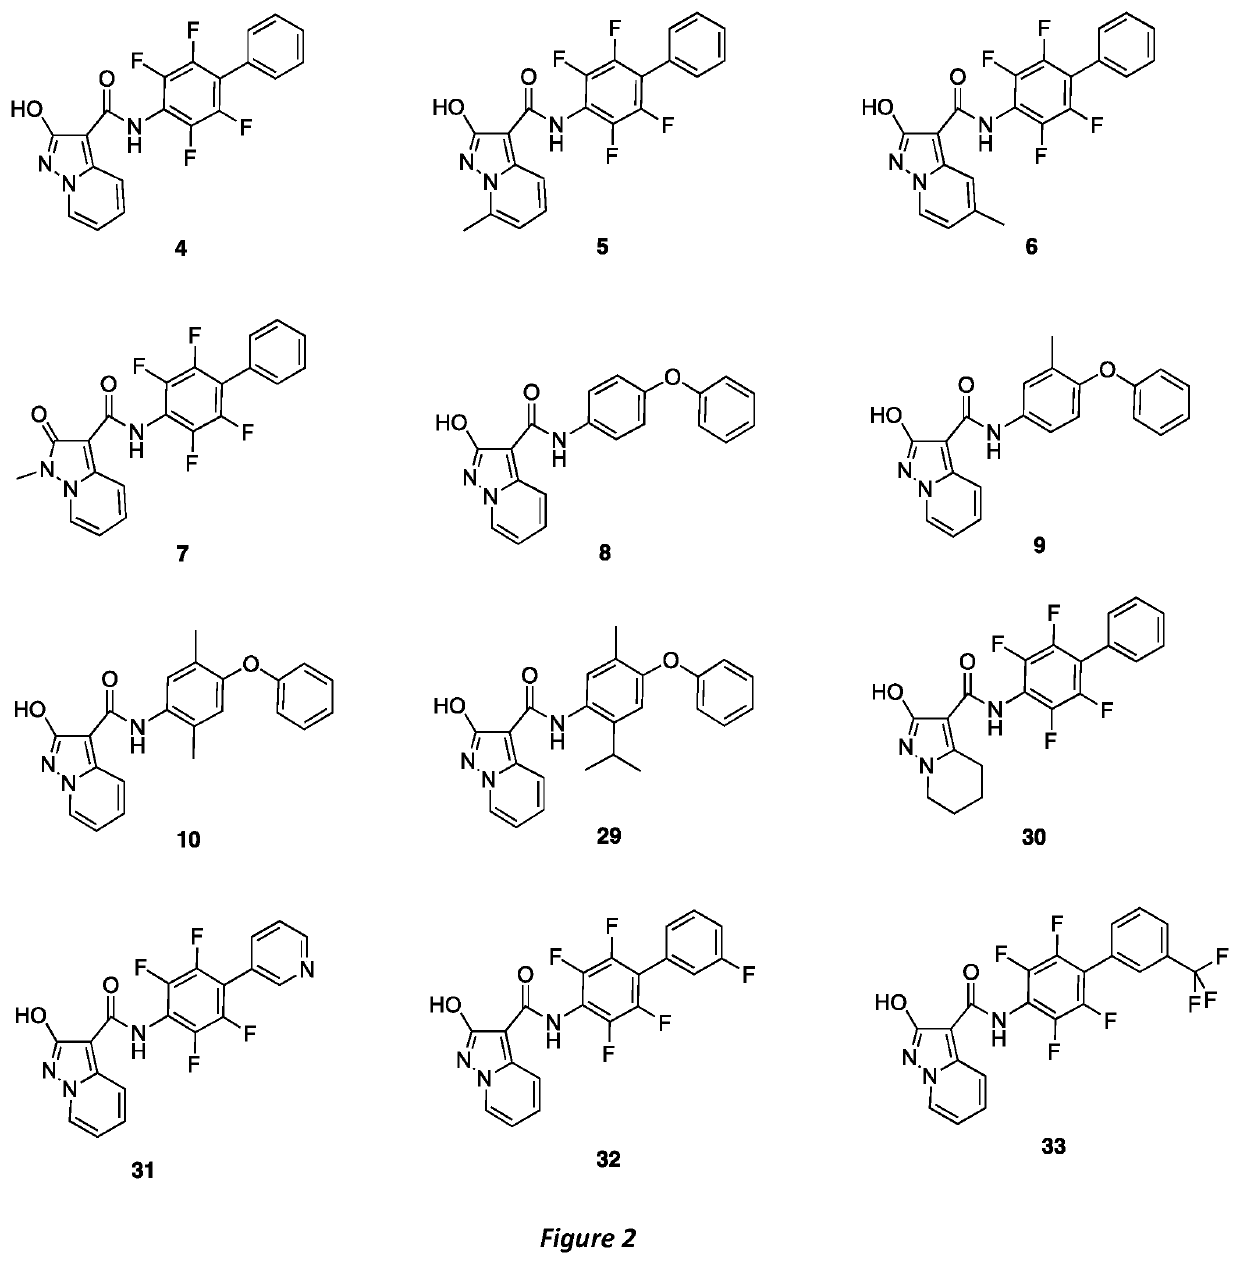 NOVEL HUMAN DIHYDROOROTATE DEHYDROGENASE (hDHODH) INHIBITORS AND THEIR USE IN TARGETING ONCOLOGICAL DISEASES SENSITIVE TO PYRIMIDINE STARVATION